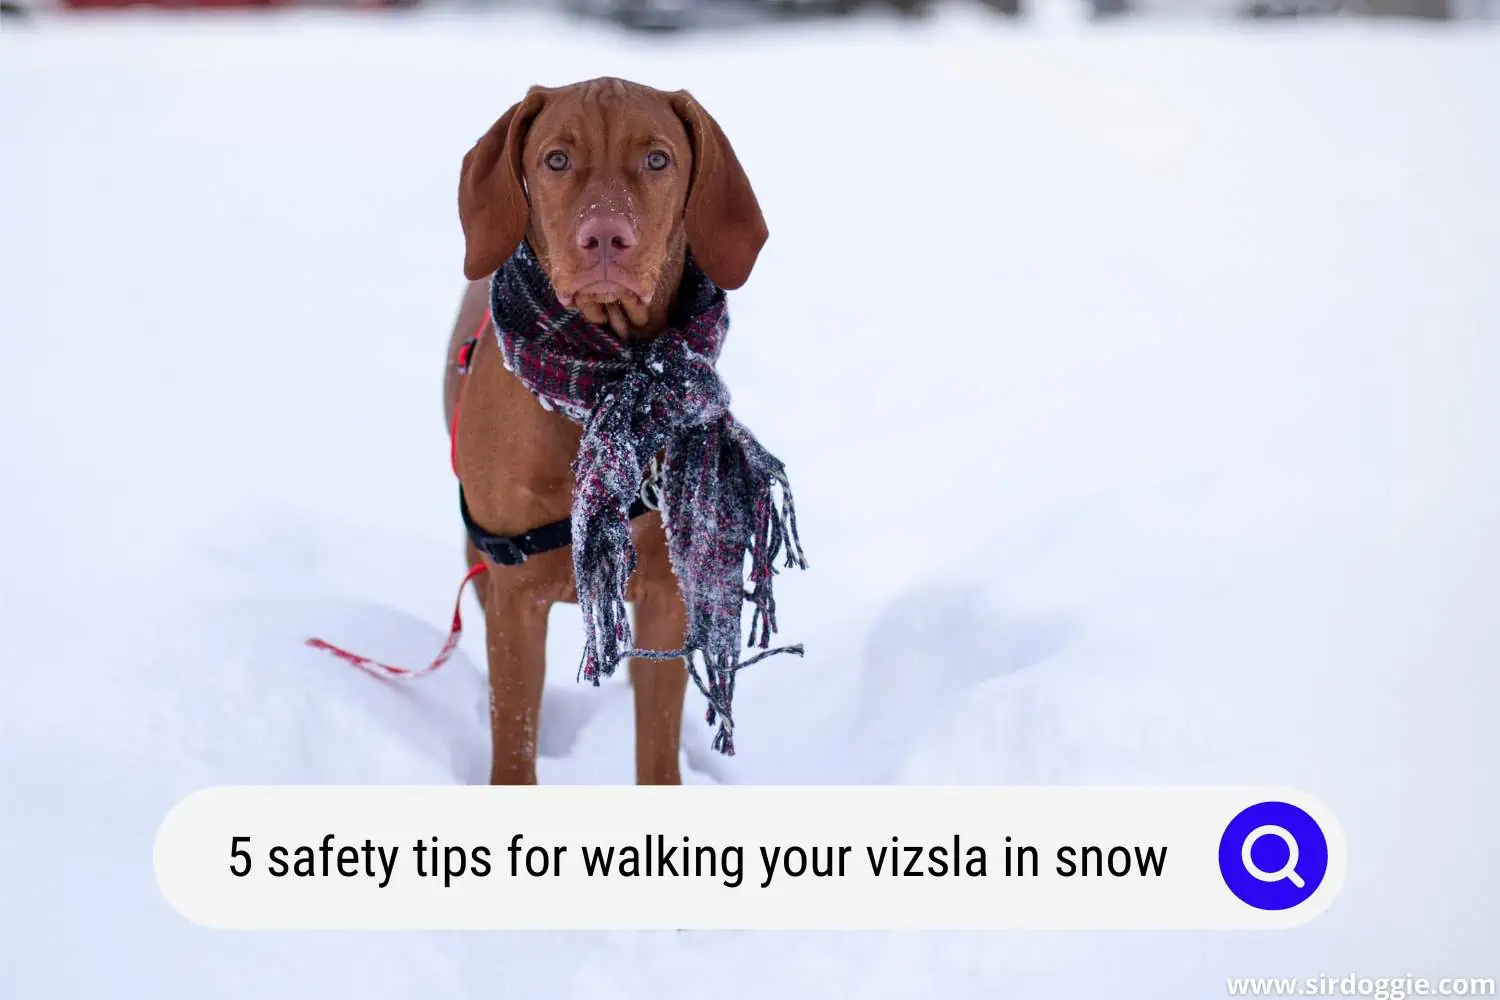 safety tips for walking vizsla dogs in the snow